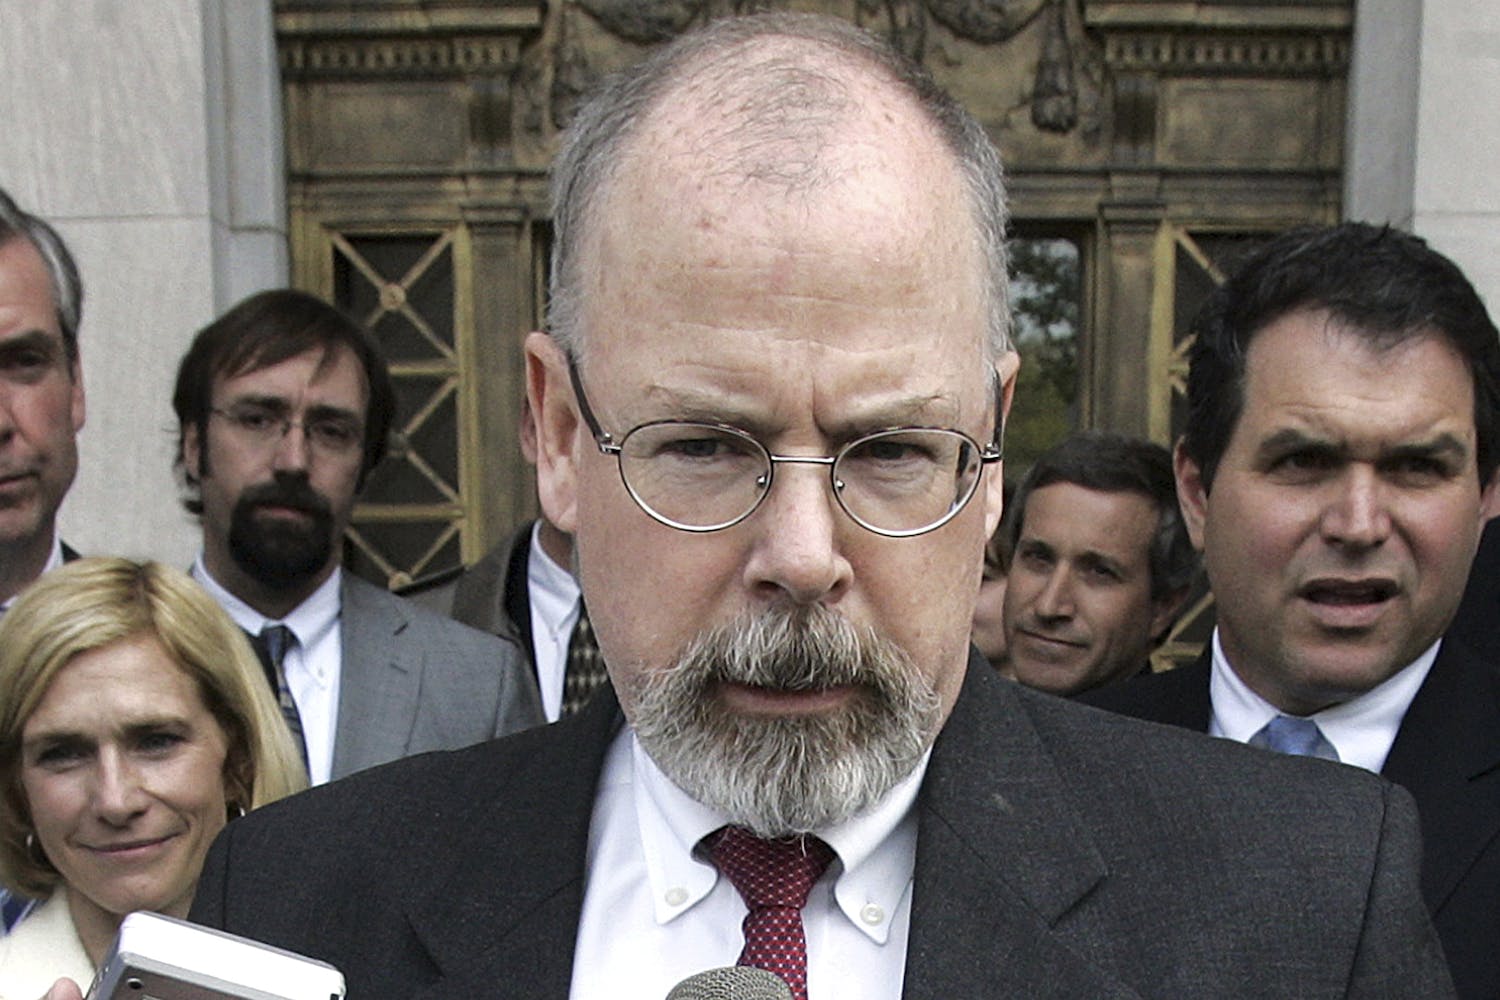 FILE - In this April 25, 2006, file photo, John Durham speaks to reporters on the steps of U.S. District Court in New Haven, Conn. Durham, Connecticut’s U.S. attorney, is leading the investigation into the origins of the Russia probe. He is no stranger to high-profile, highly scrutinized investigations. (AP Photo/Bob Child, File)